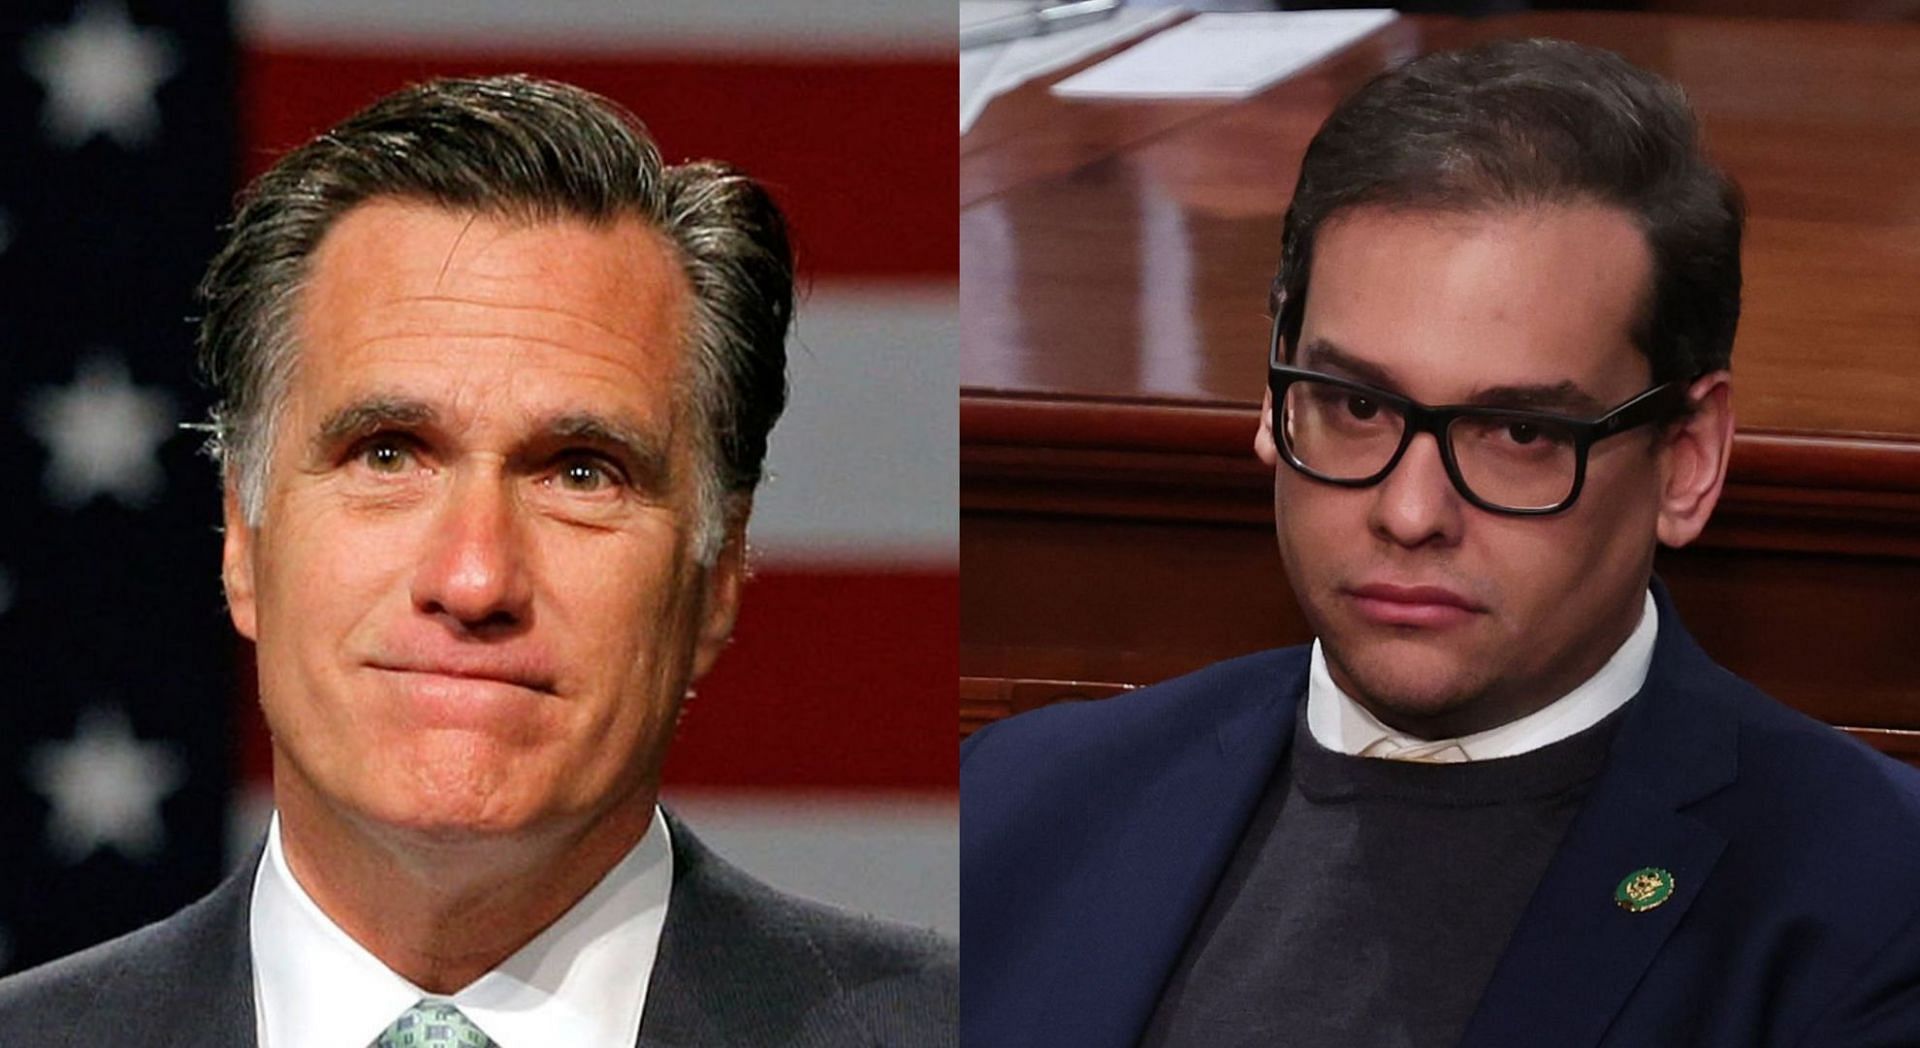 George Santos and Mitt Romney heated exchange from State of the Union went viral online (Image via Getty Images)